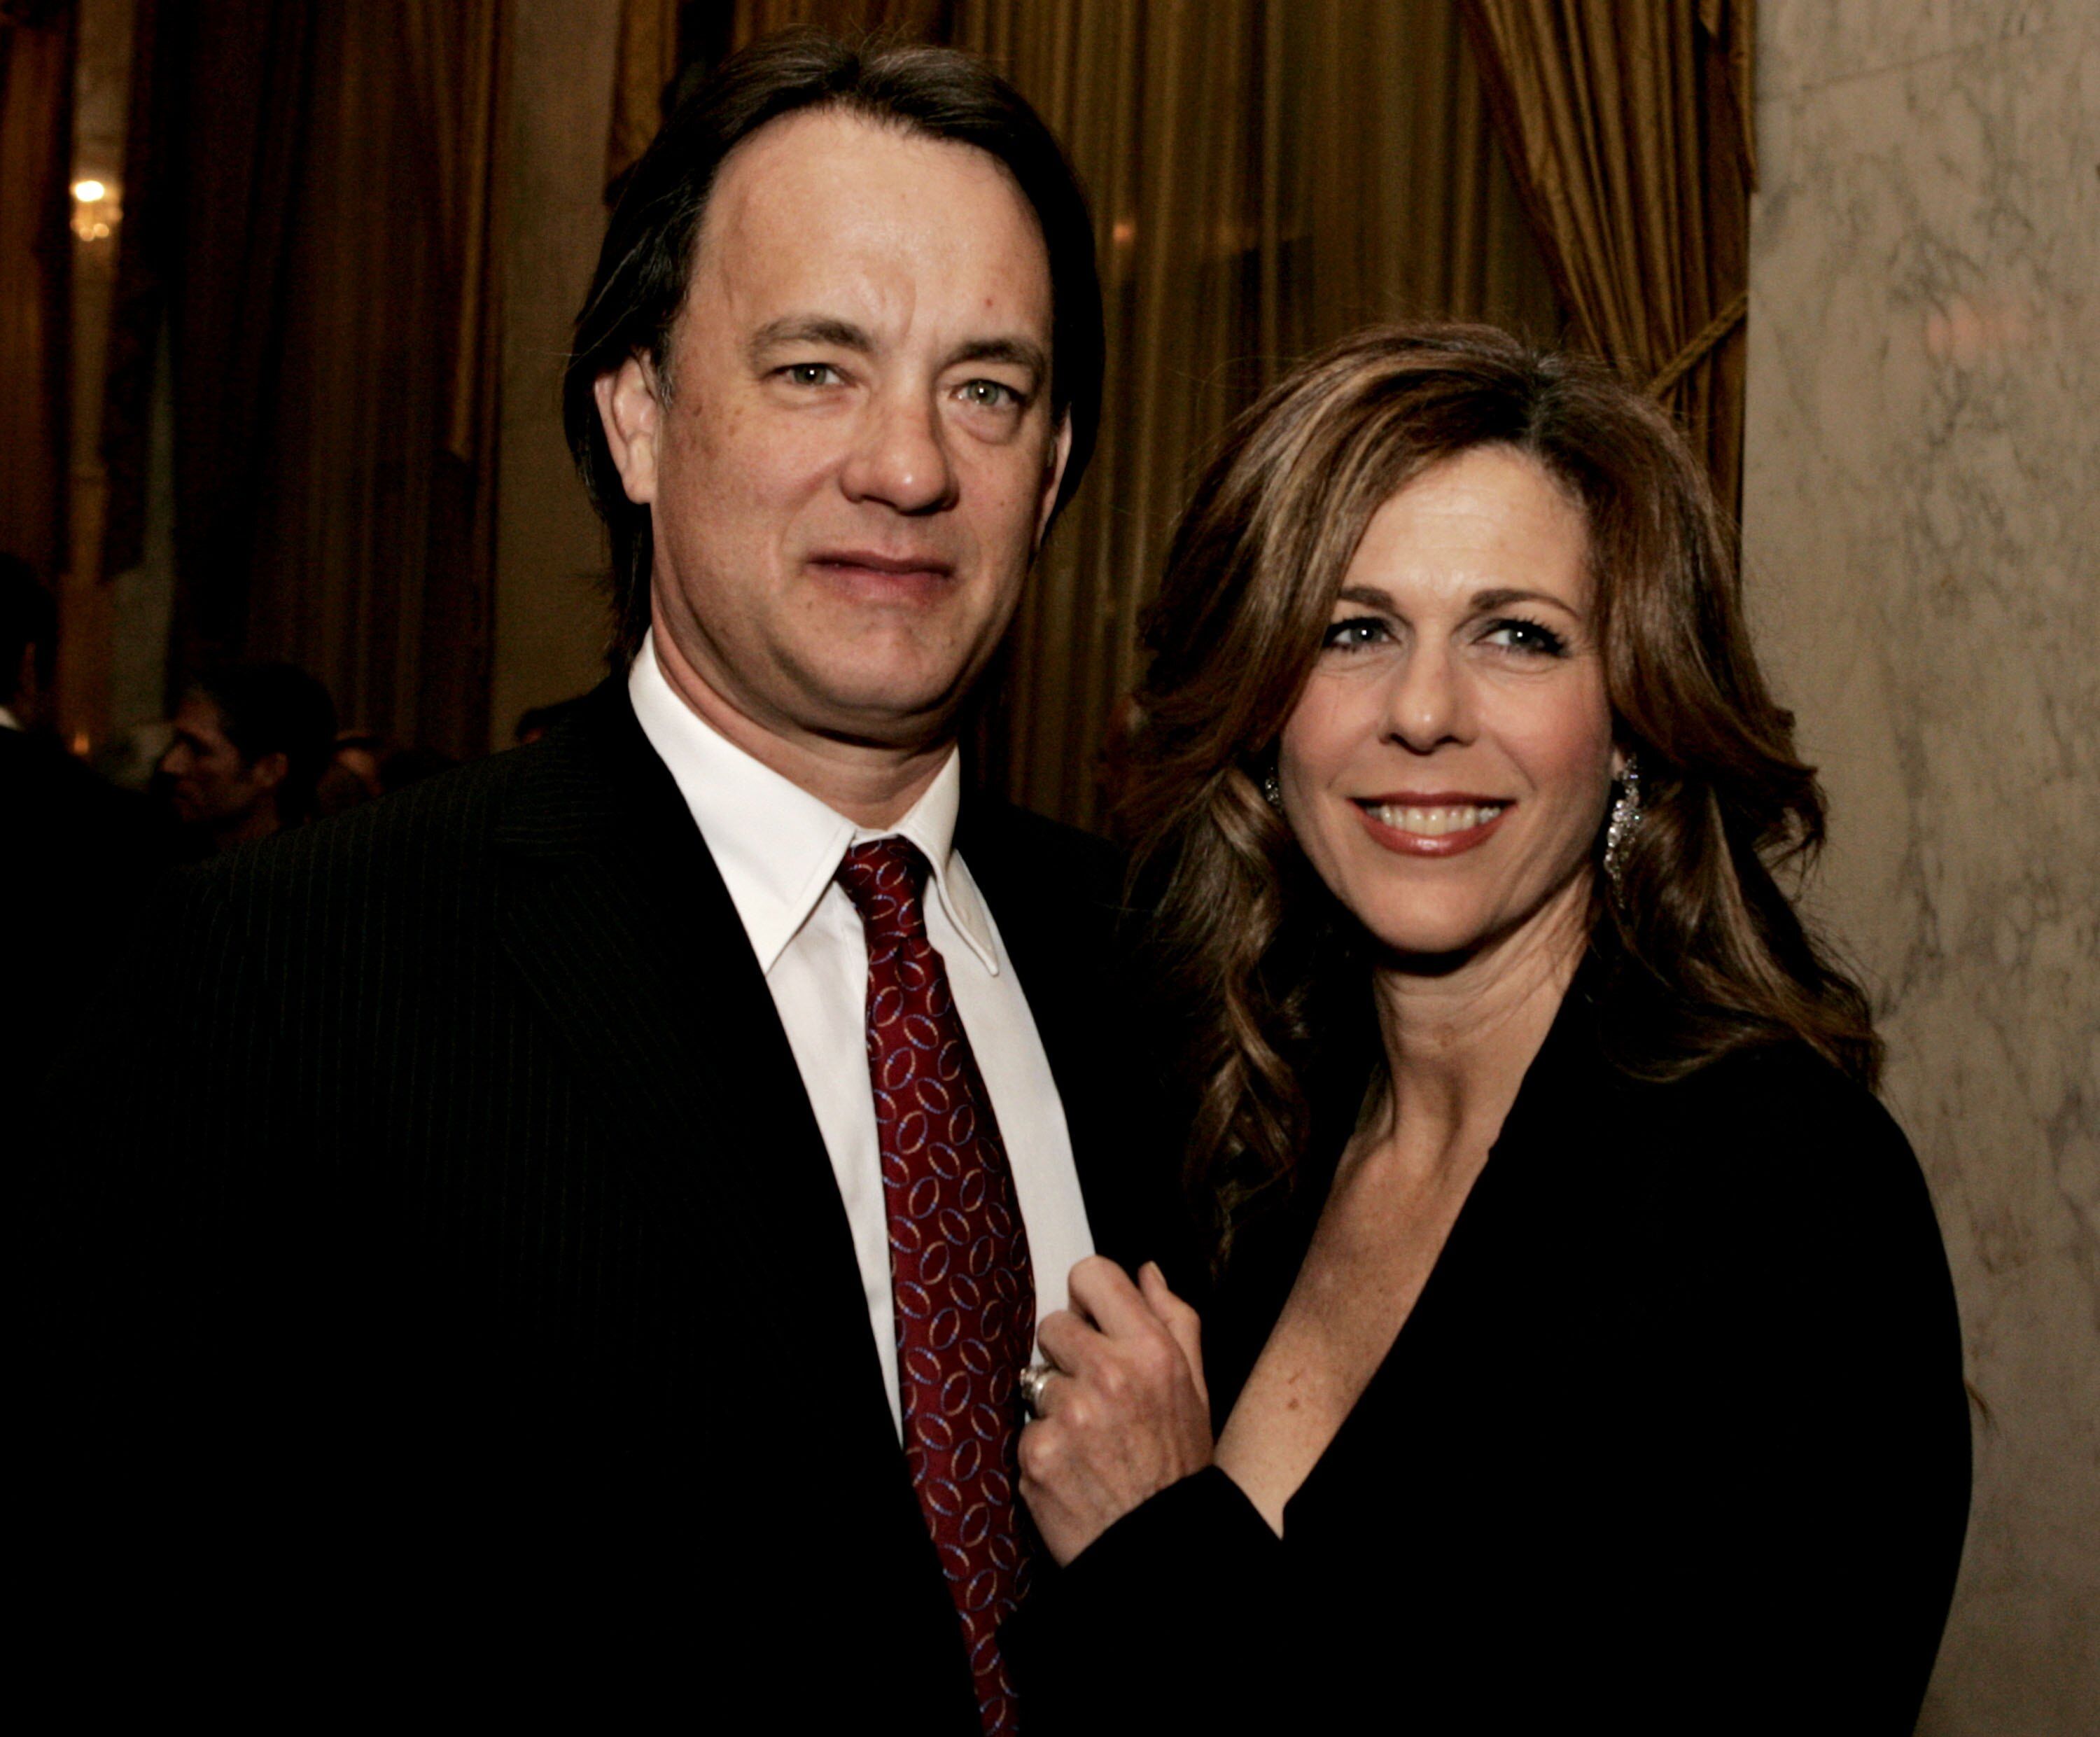 Tom Hanks and actress Rita Wilson speak during the EIF's Women's Cancer Research Fund honoring Melissa Etheridge. | Source: Getty Images